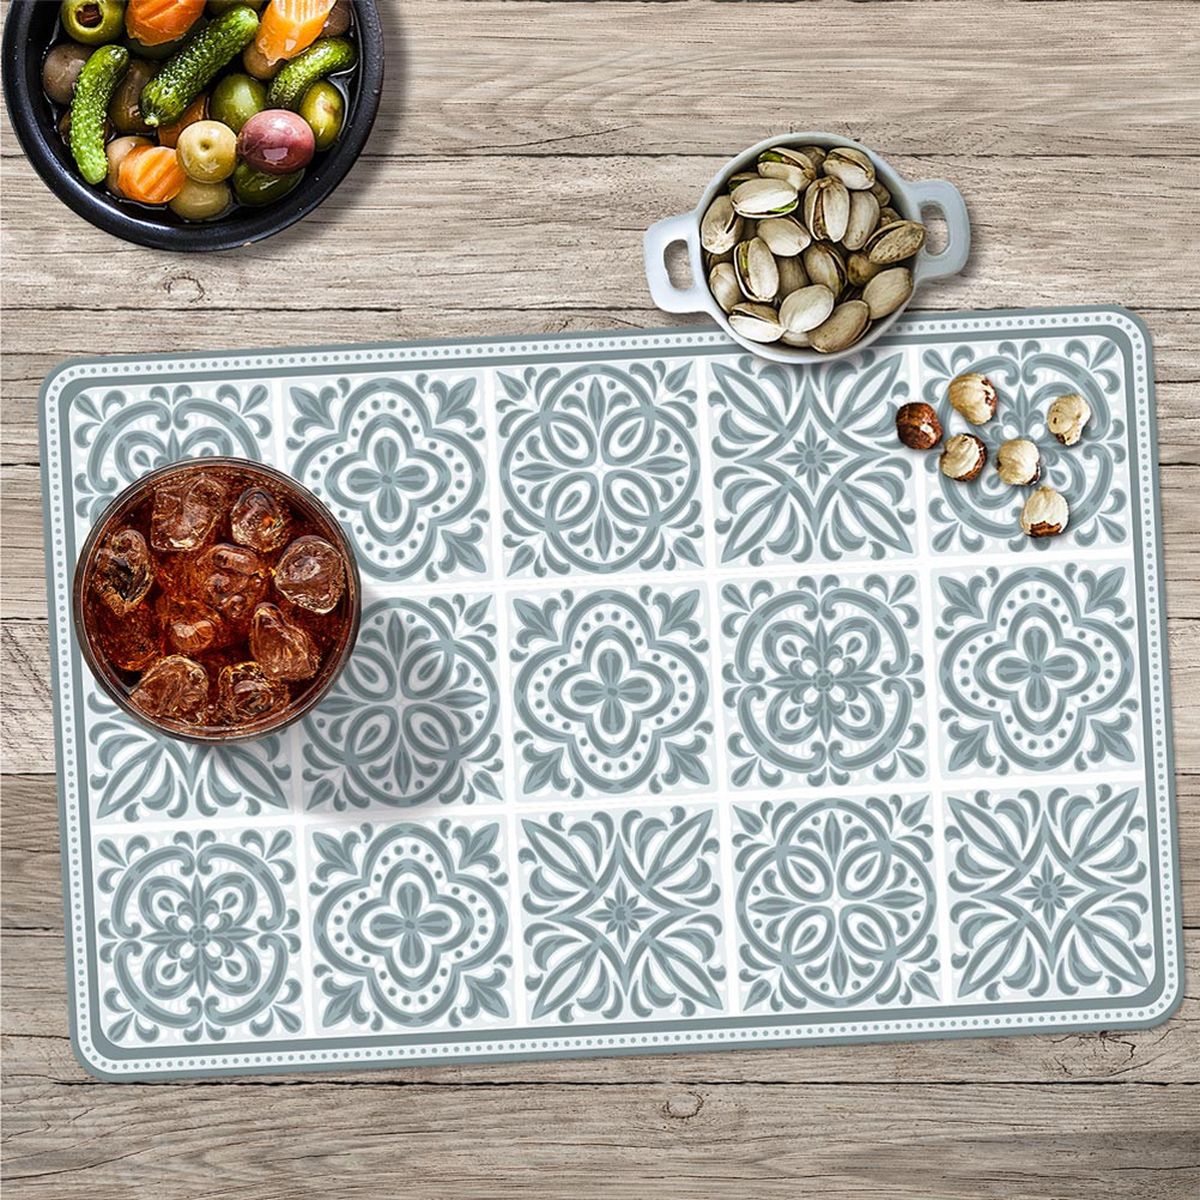 Placemat - White and blue cement tiles